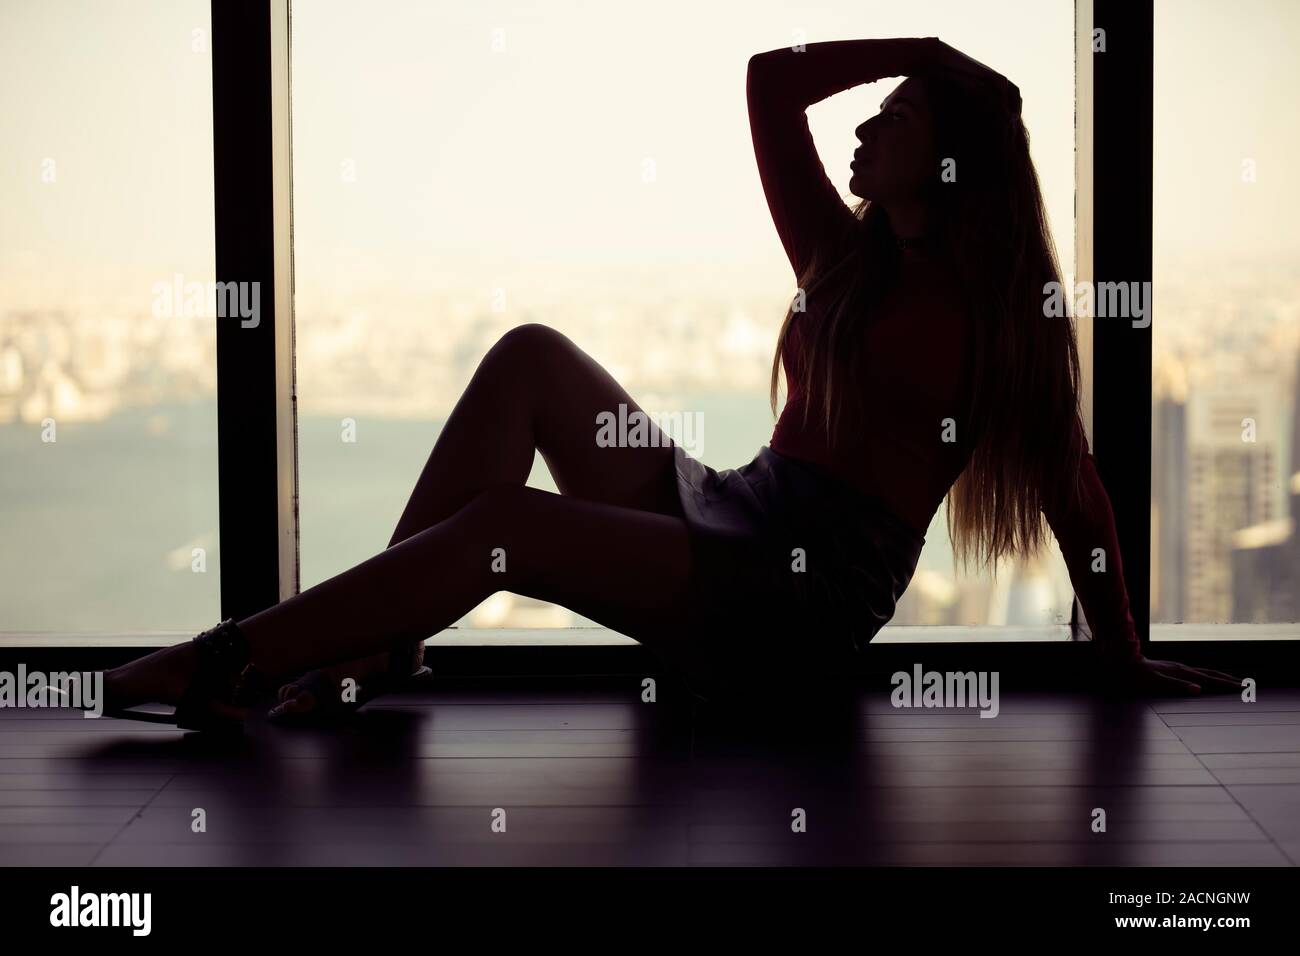 A Silhouette Girl  sitting on floor Stock Photo